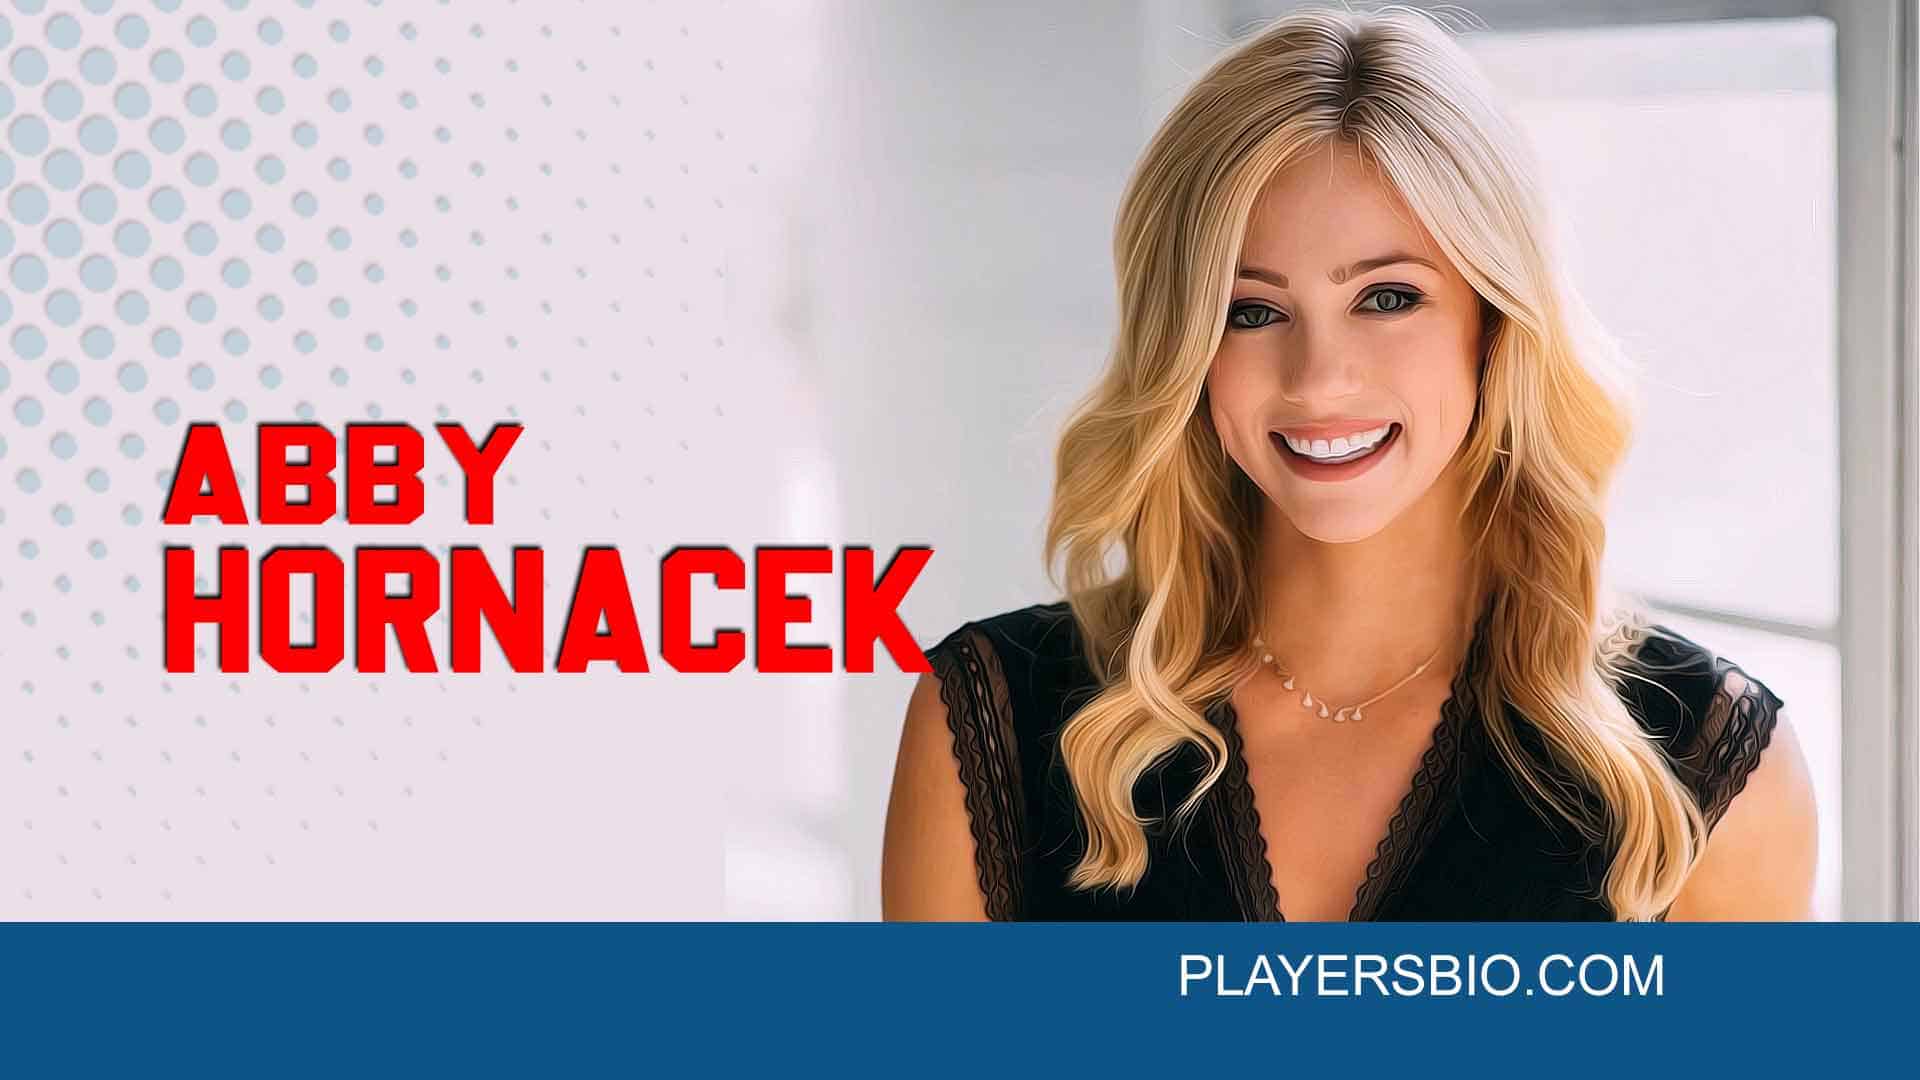 Abby Hornacek is an American host and journalist who has a net worth of $50...